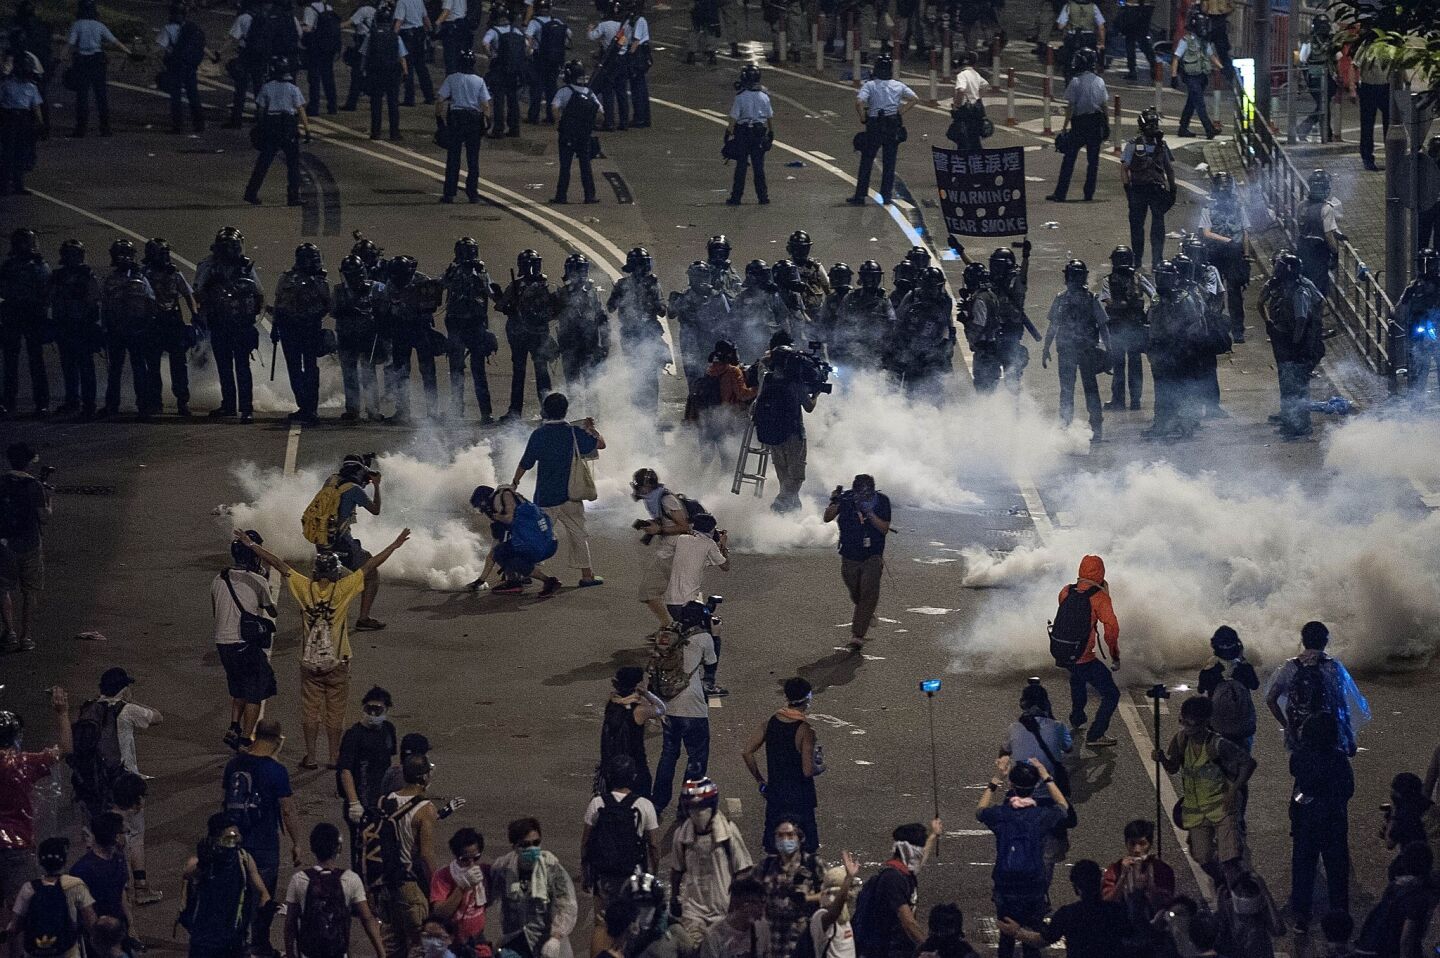 Demonstrators disperse as tear gas is fired by police on Sept. 29, 2014.